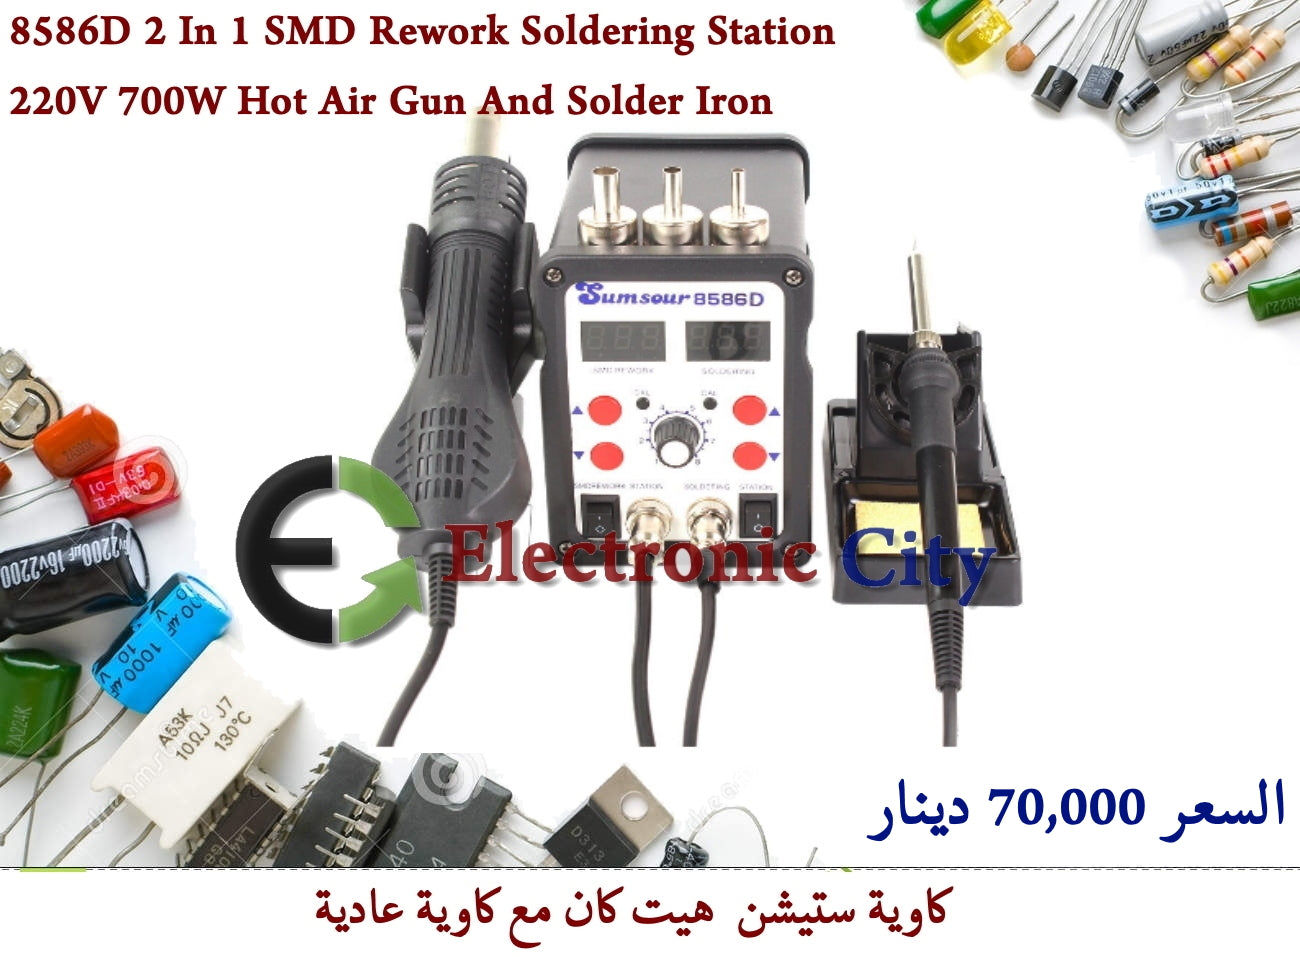 8586D 2 In 1 SMD Rework Soldering Station 220V 700W Hot Air Gun And Solder Iron